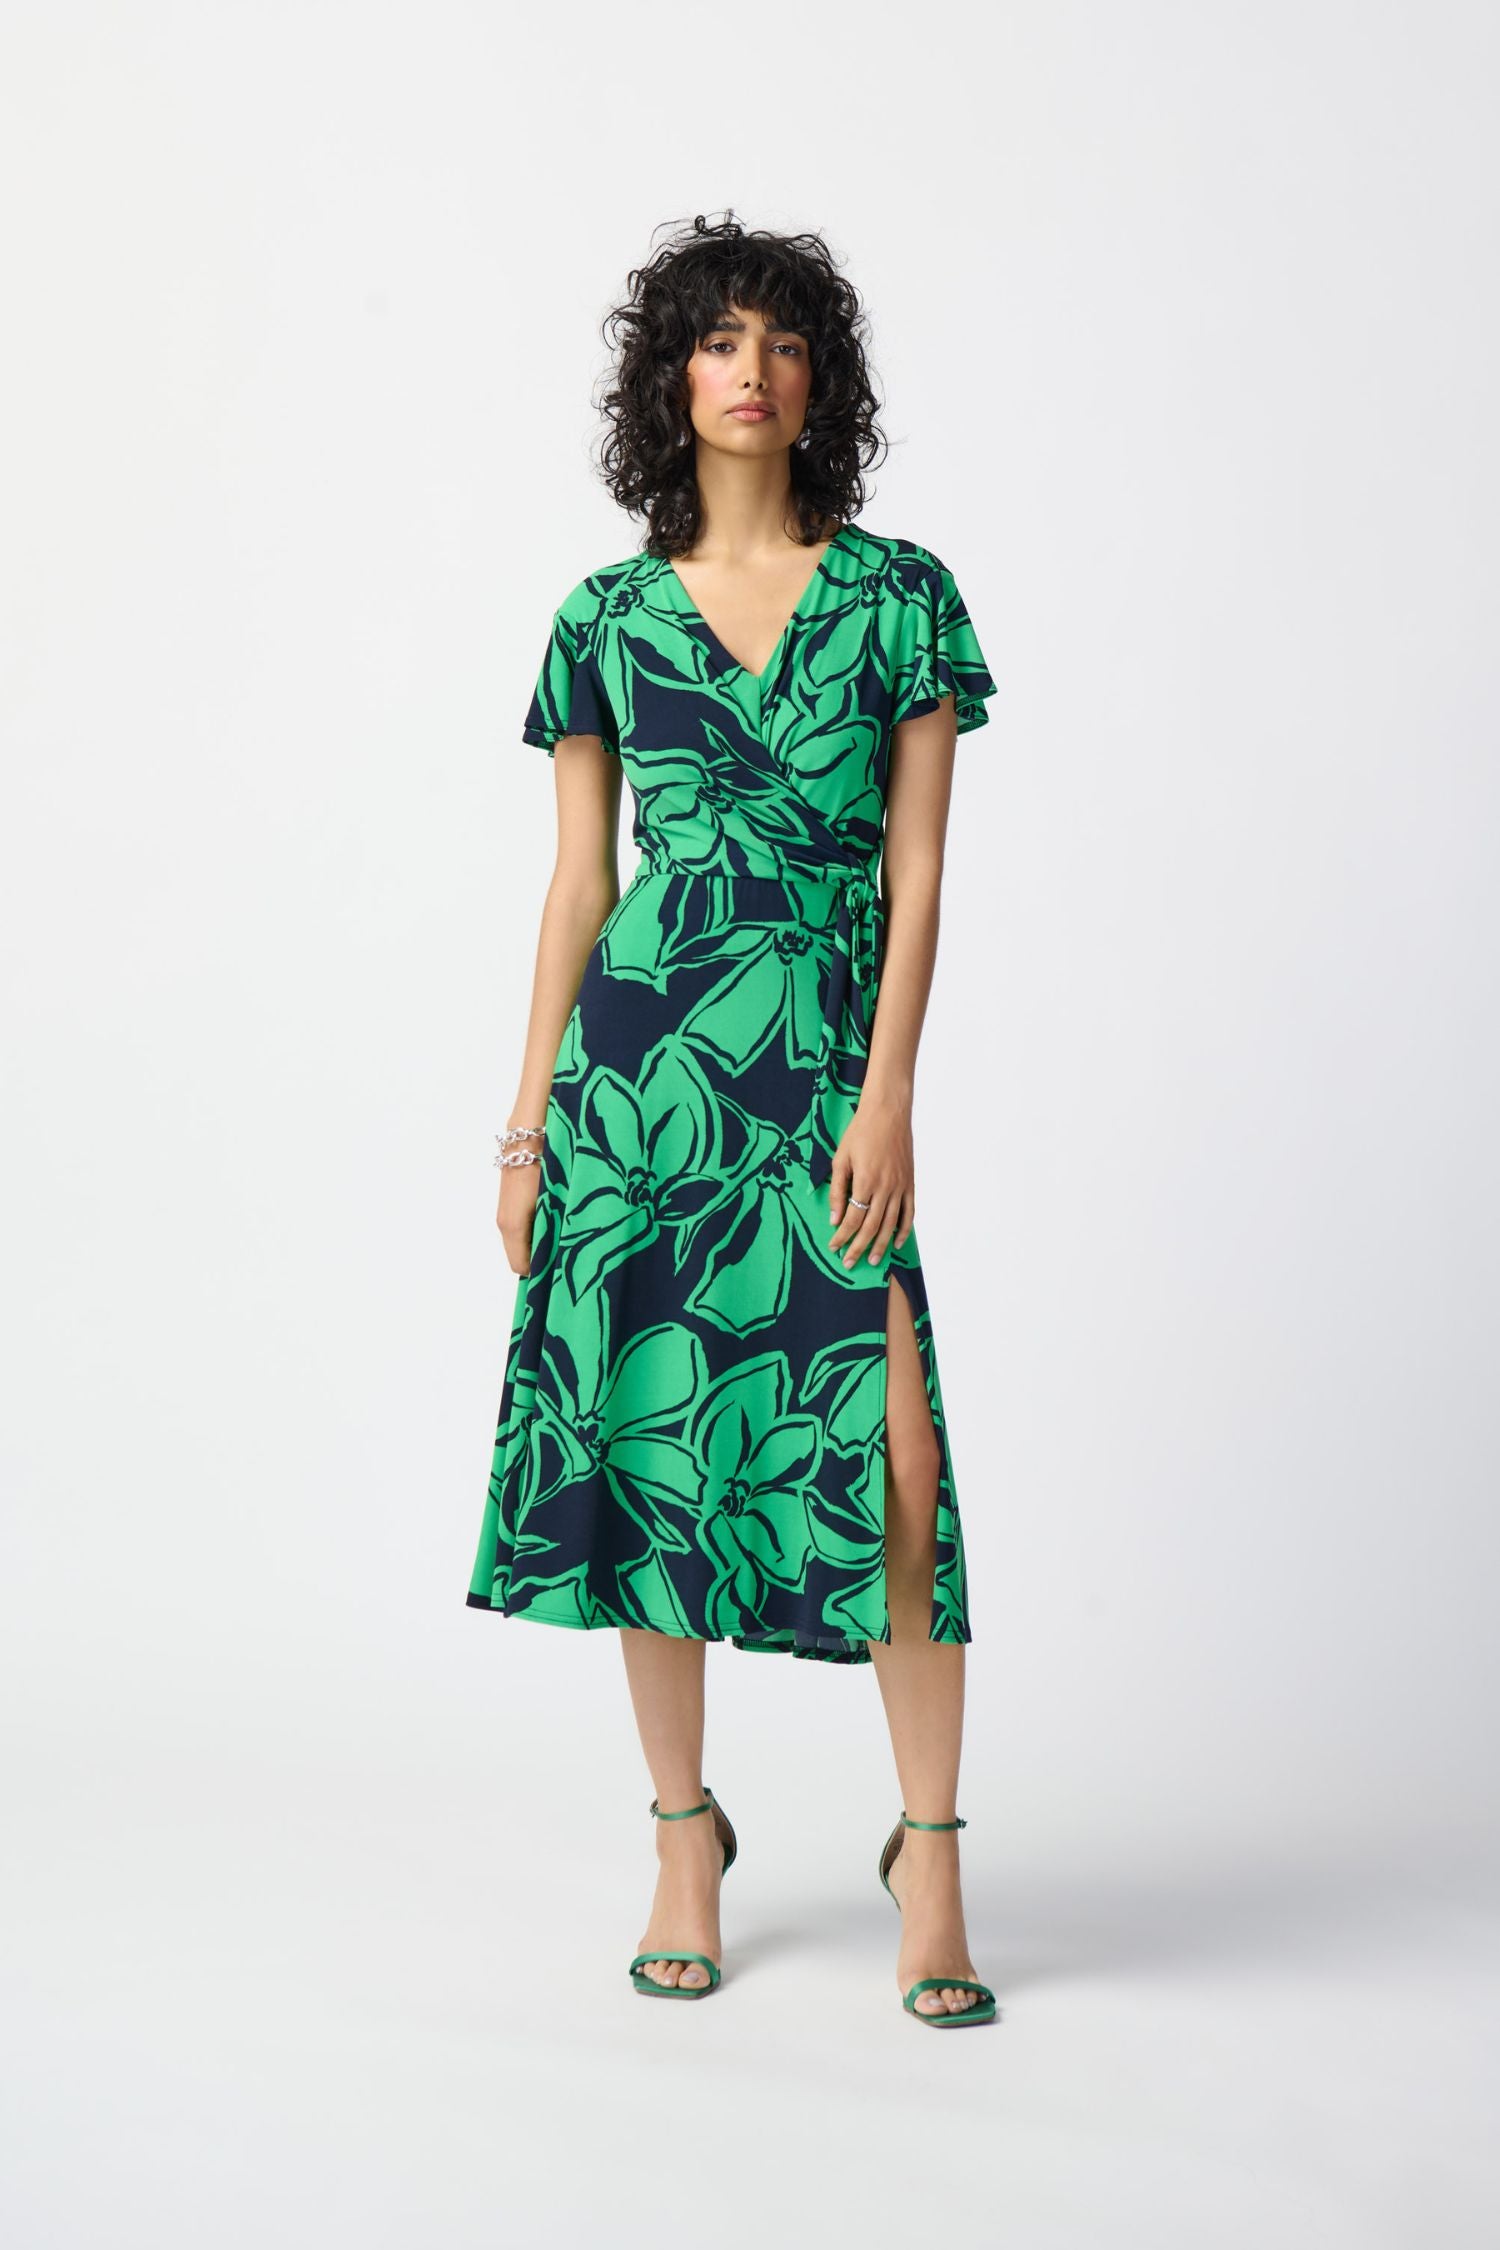 Joseph Ribkoff Floral Print Silky Knit Wrap Dress - Style 241052, front2